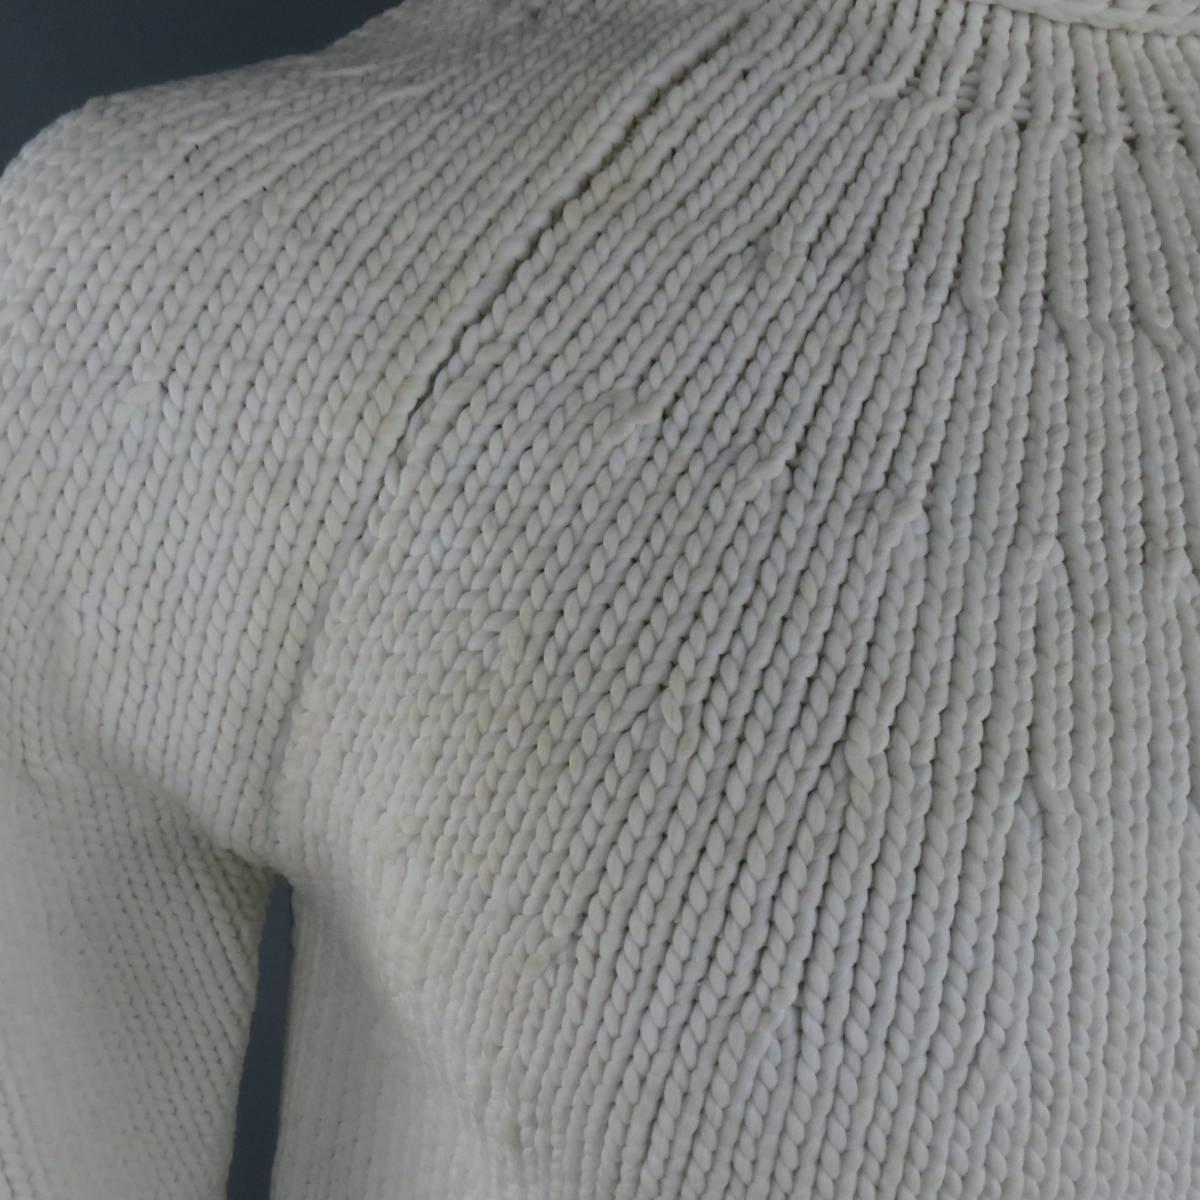 Vintage YOHJI YAMAMOTO oversized pullover sweater comes in a rigid, starched off white knit and features a mock crew neck, raglan sleeves, and rolled hems. Discolorations throughout. As-Is. Made in Japan.
 
Fair Pre-Owned Condition.
Marked: M
